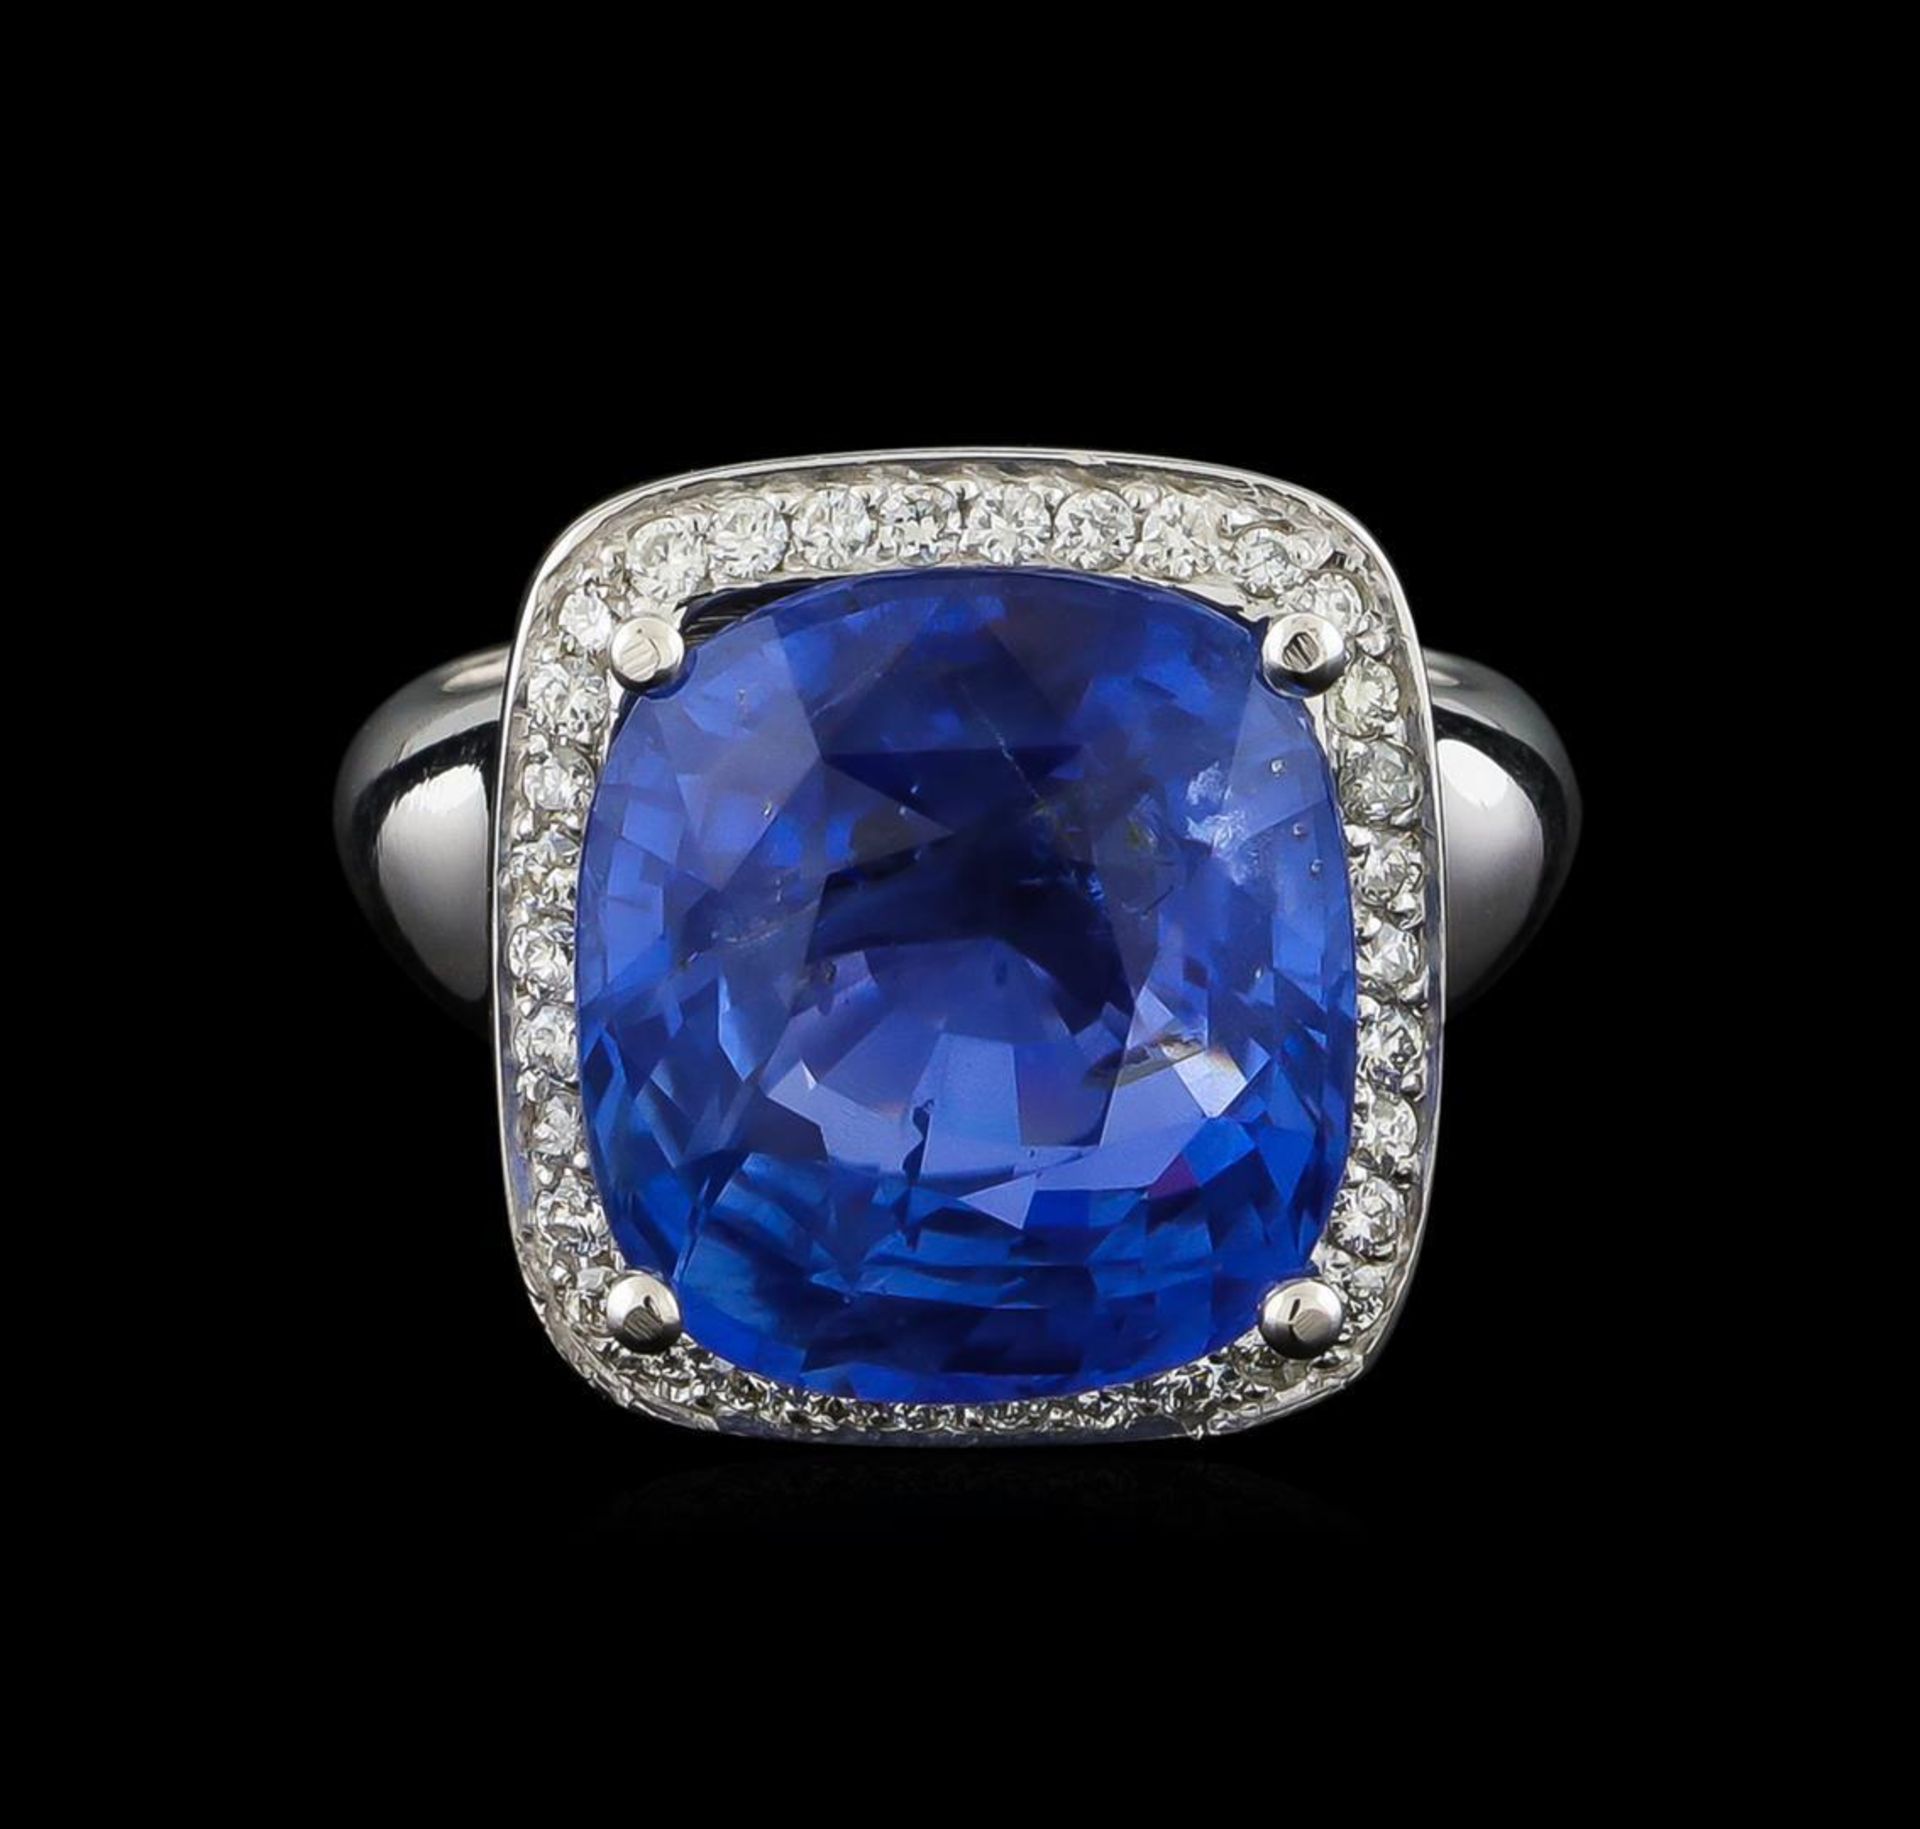 GIA Cert 13.93 ctw Blue Sapphire and Diamond Ring - 14KT White Gold - Image 2 of 5